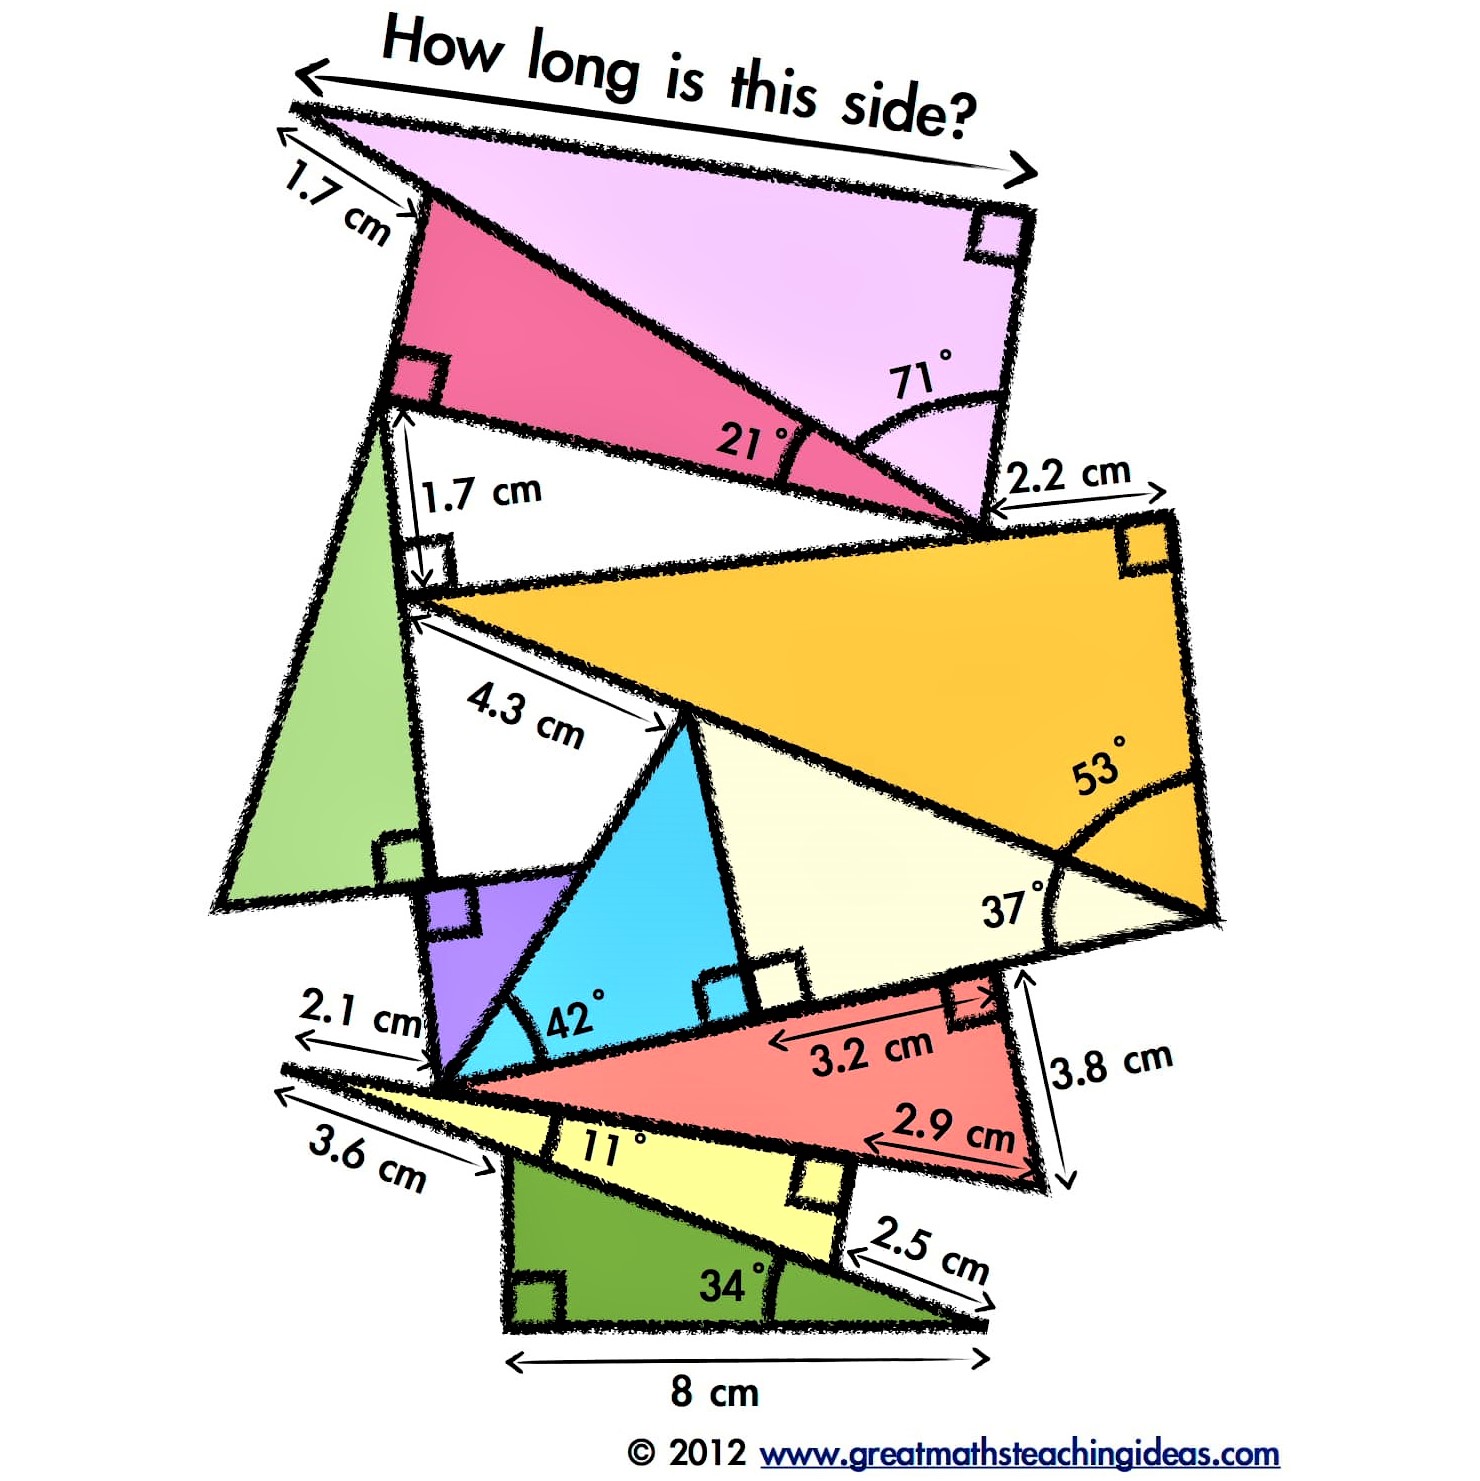 Math puzzle: In this messy pile-up of geometric shapes, find the length of the top side of triangle sitting on the pile